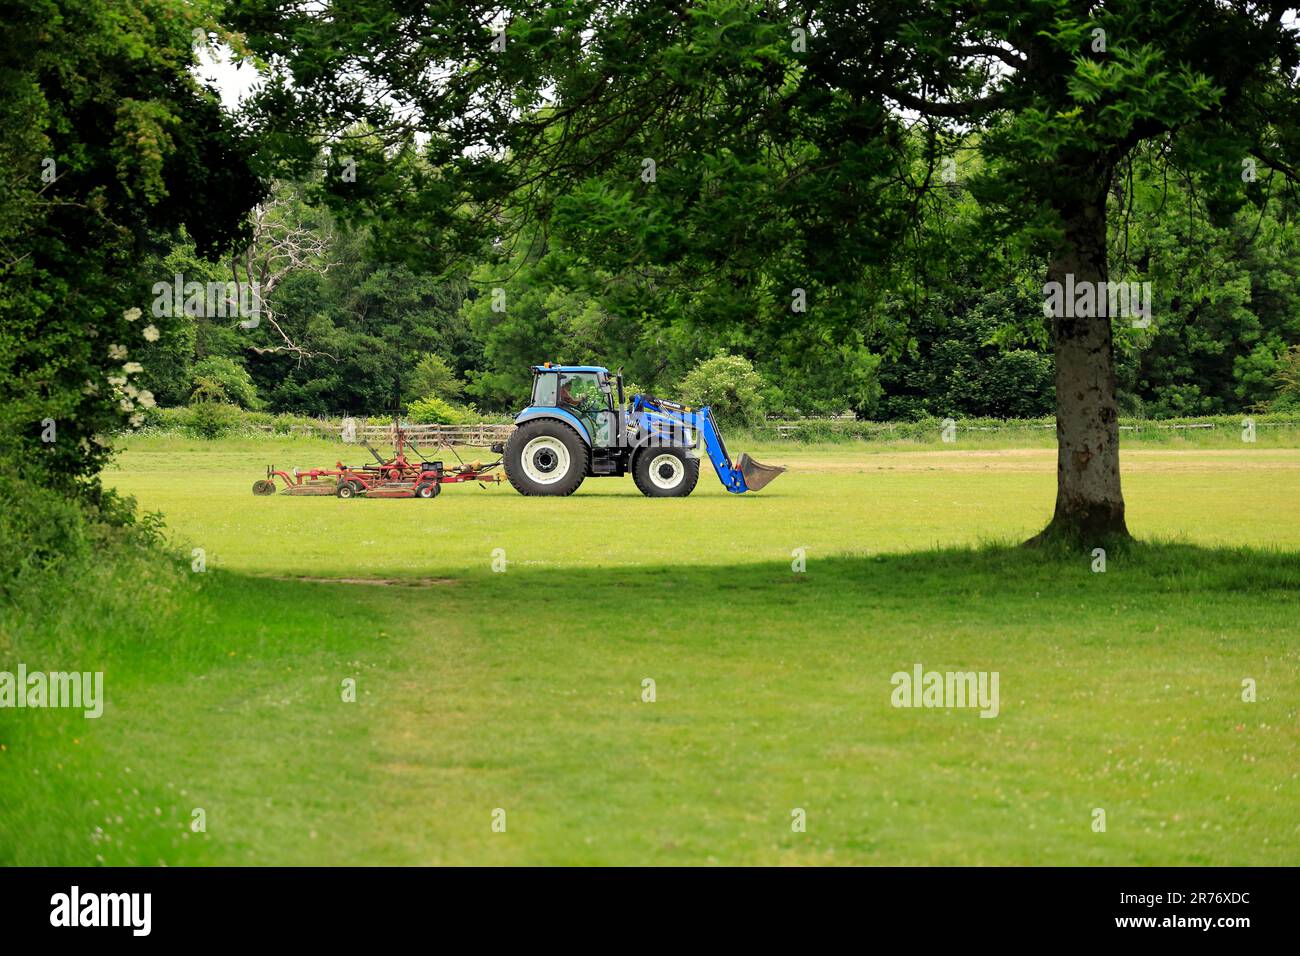 Blue Tractor Smoothing the Ground in a Farm with Trees and Grass